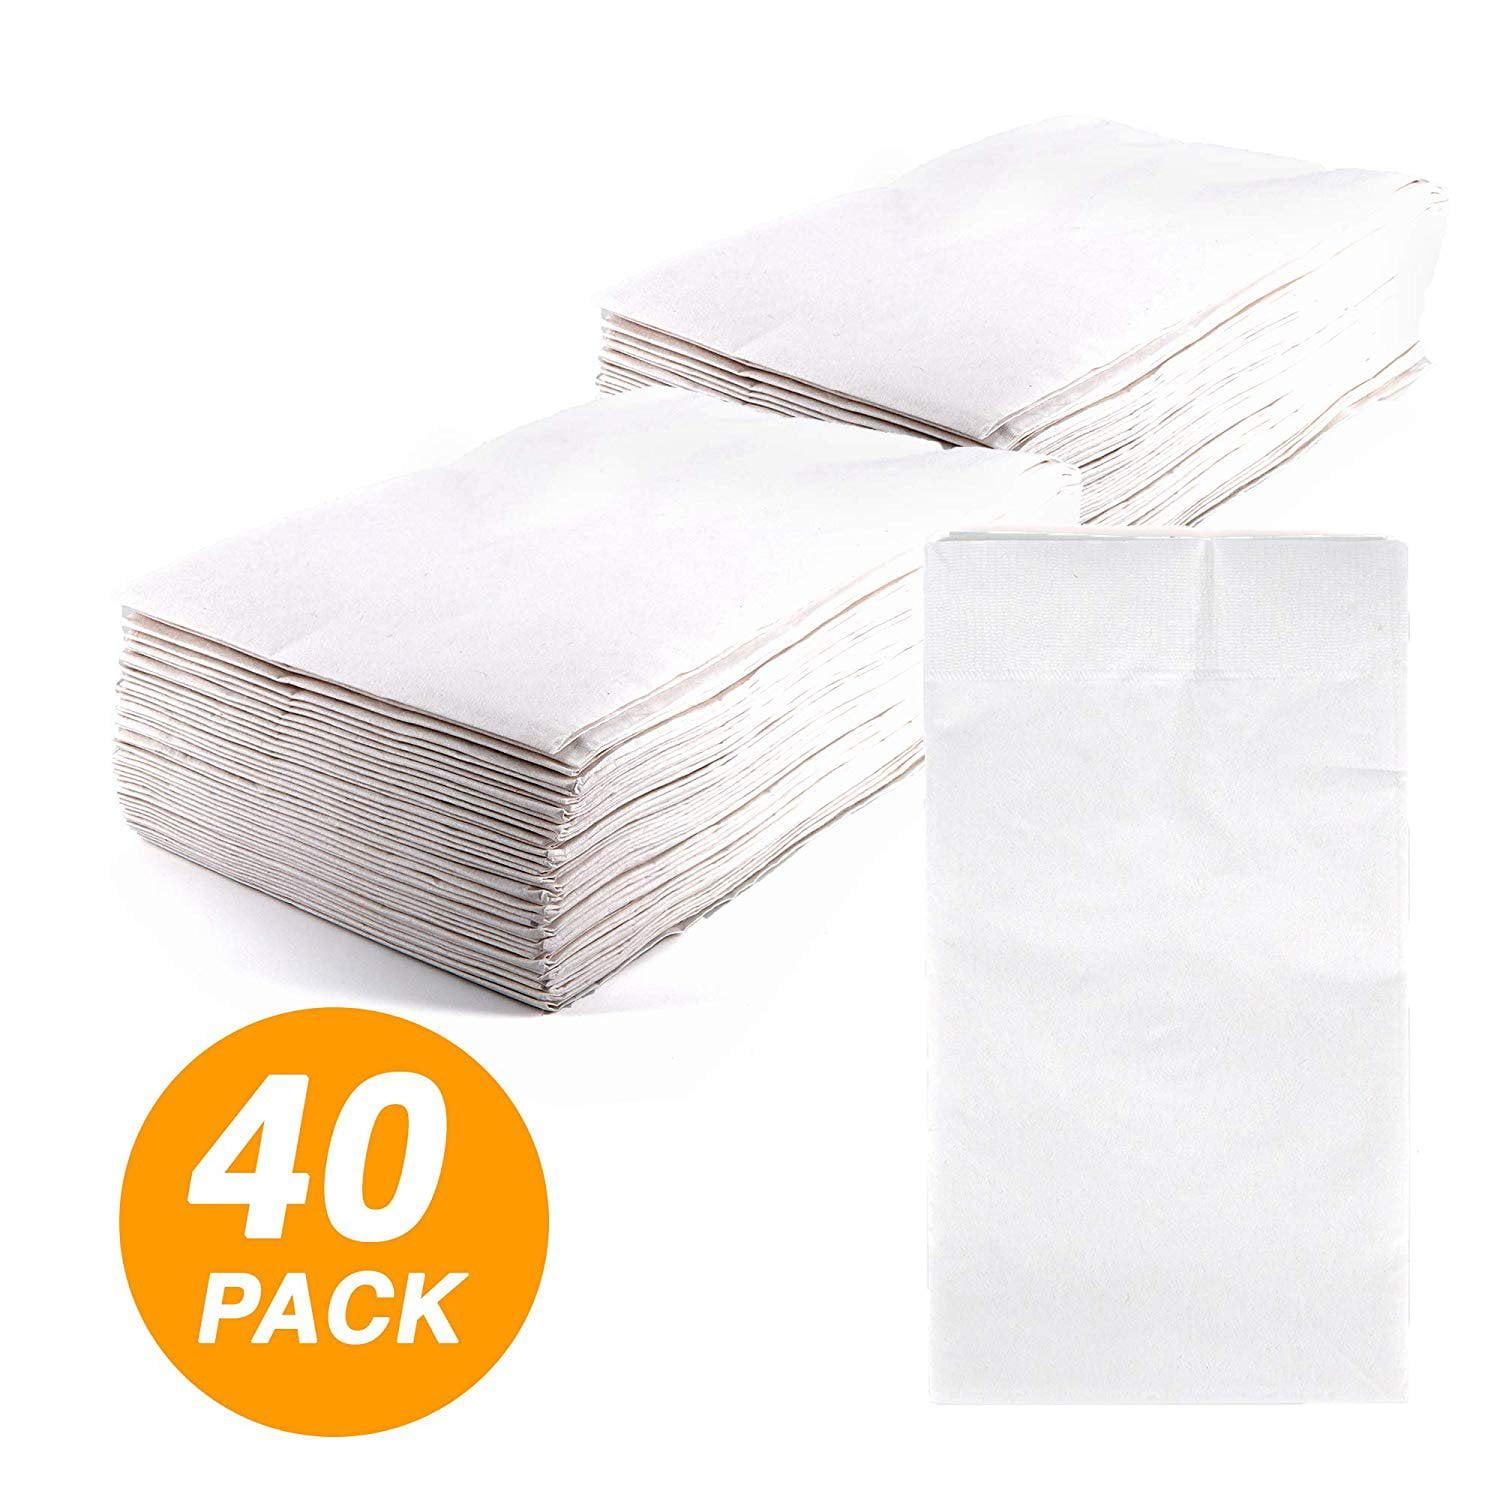 SparkSettings Big Party Pack Tableware 2 Ply Guest Towels Hand Napkins Paper Sof 